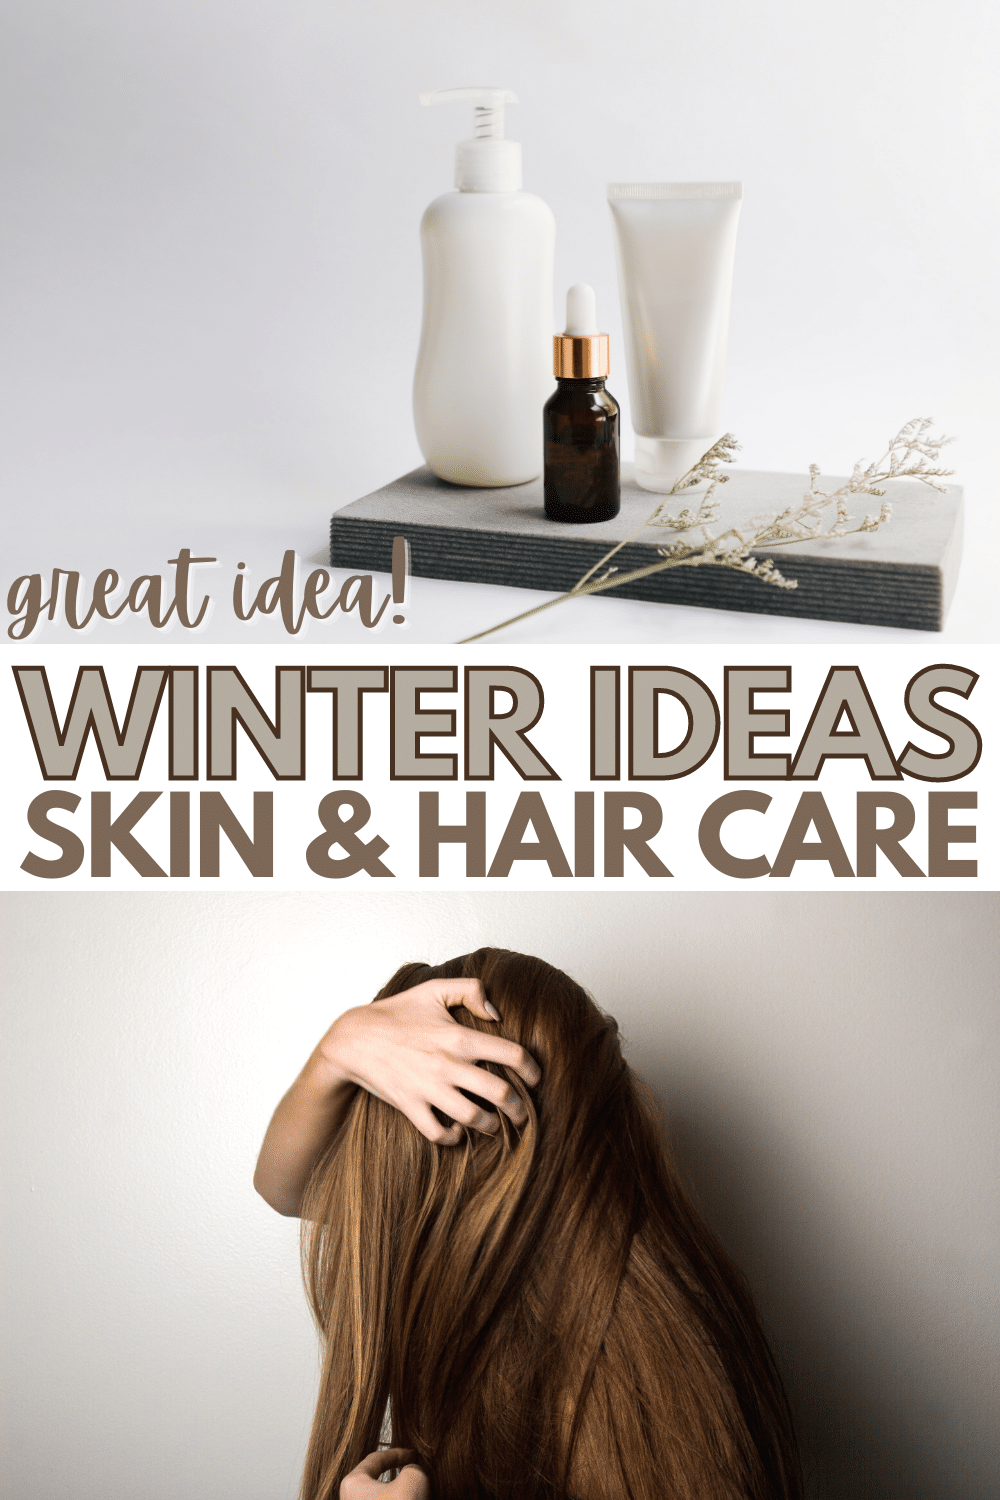 Winter conditions can wreak havoc on your skin and hair. Fend off the harmful effects of cold, harsh weather with these winter skin and hair care tips. #winter #skincare #hairtips #beautytips via @wondermomwannab